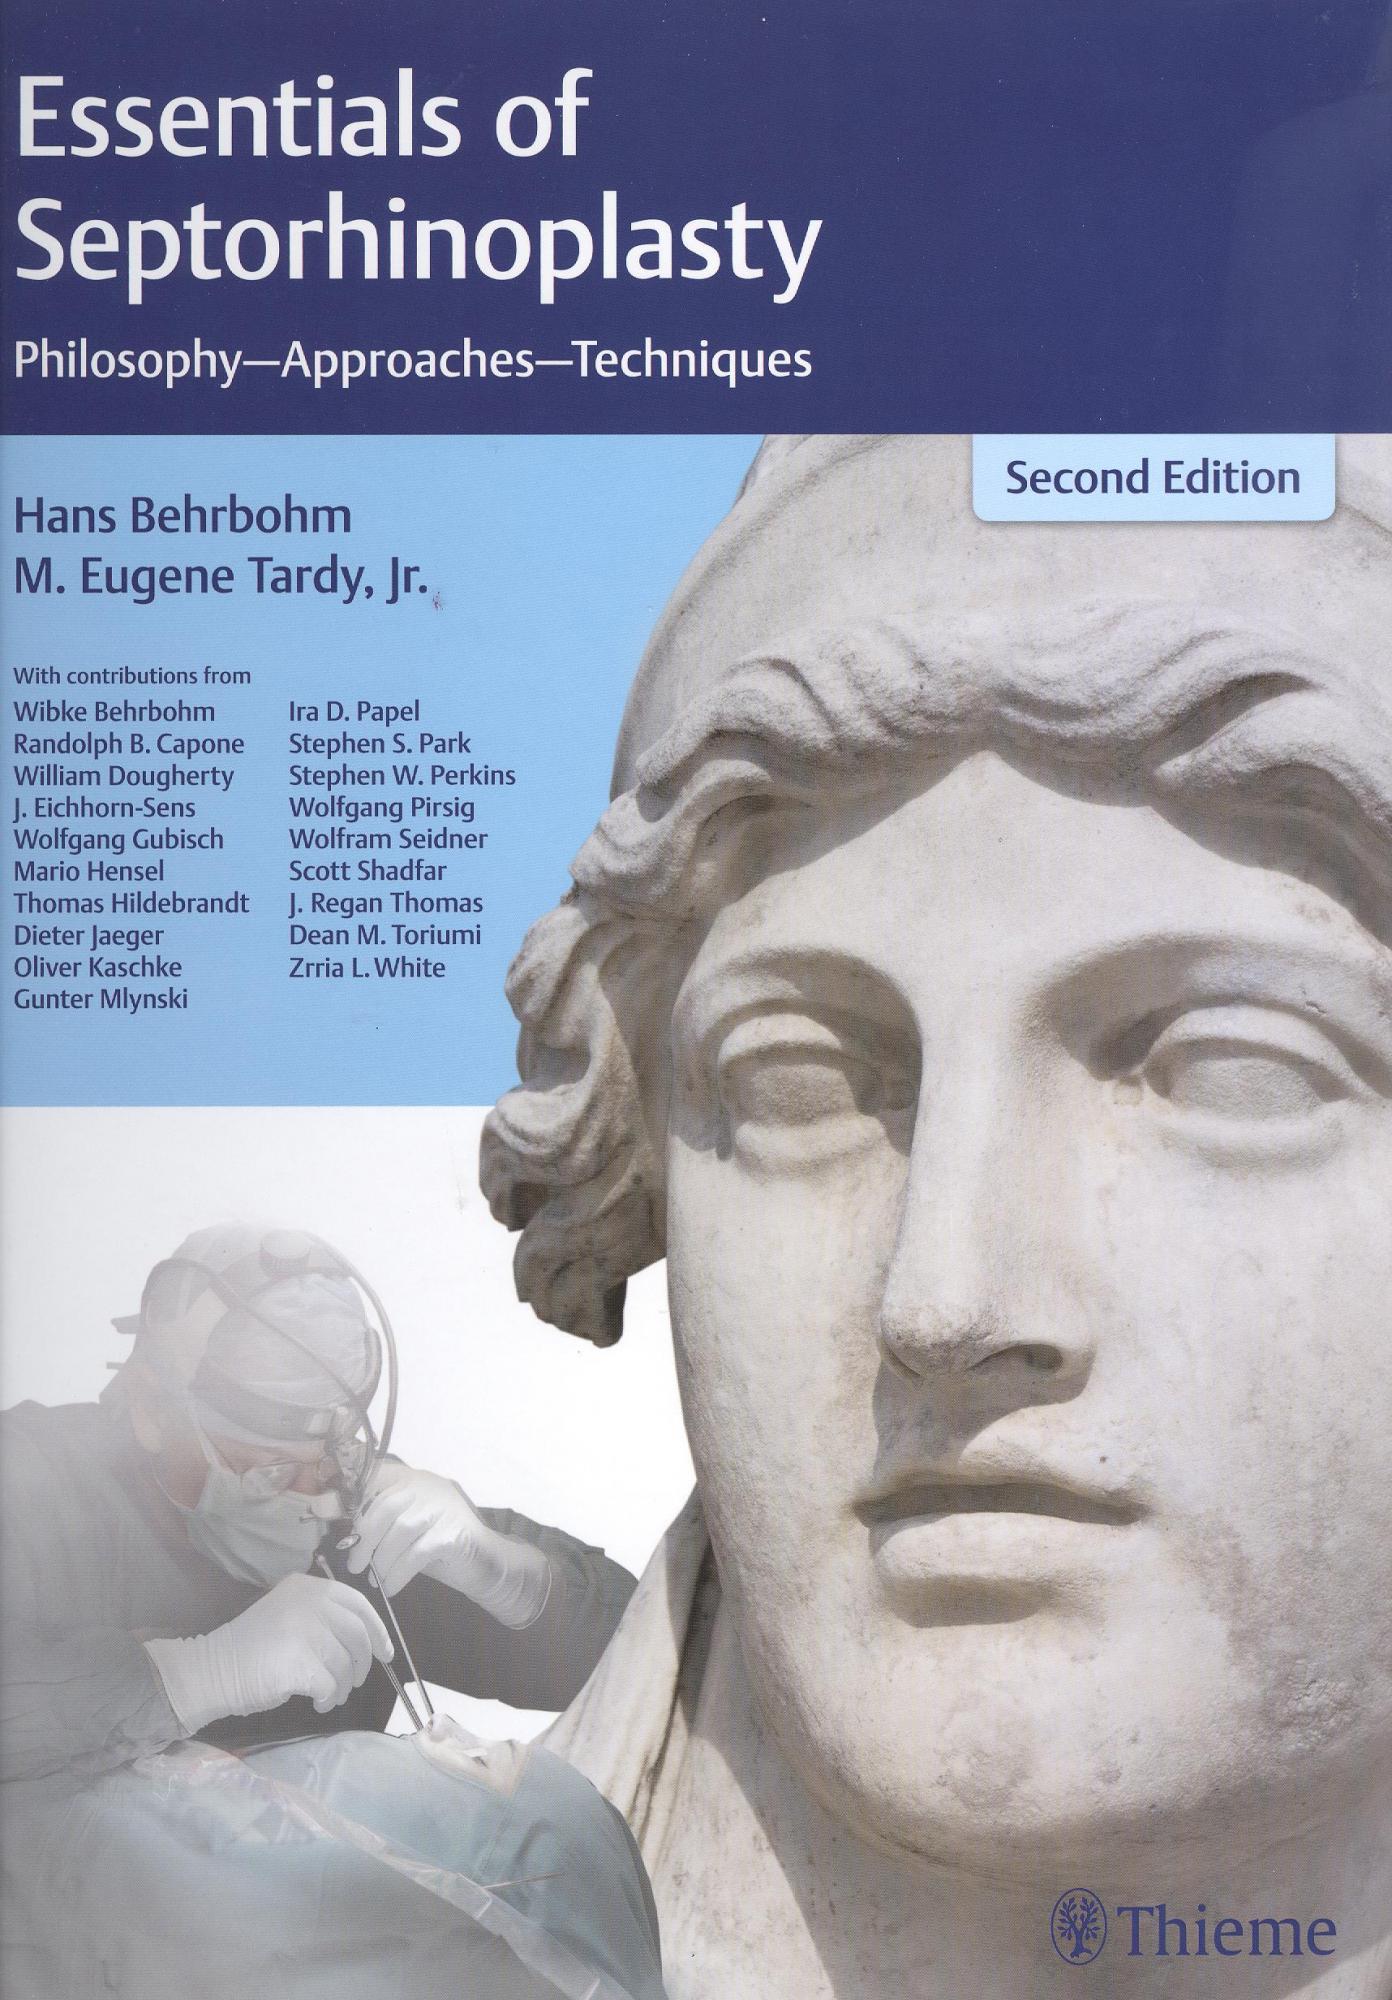 Essentials of Septorhinoplasty: Philosophy, Approaches, Techniques, 2nd Ed